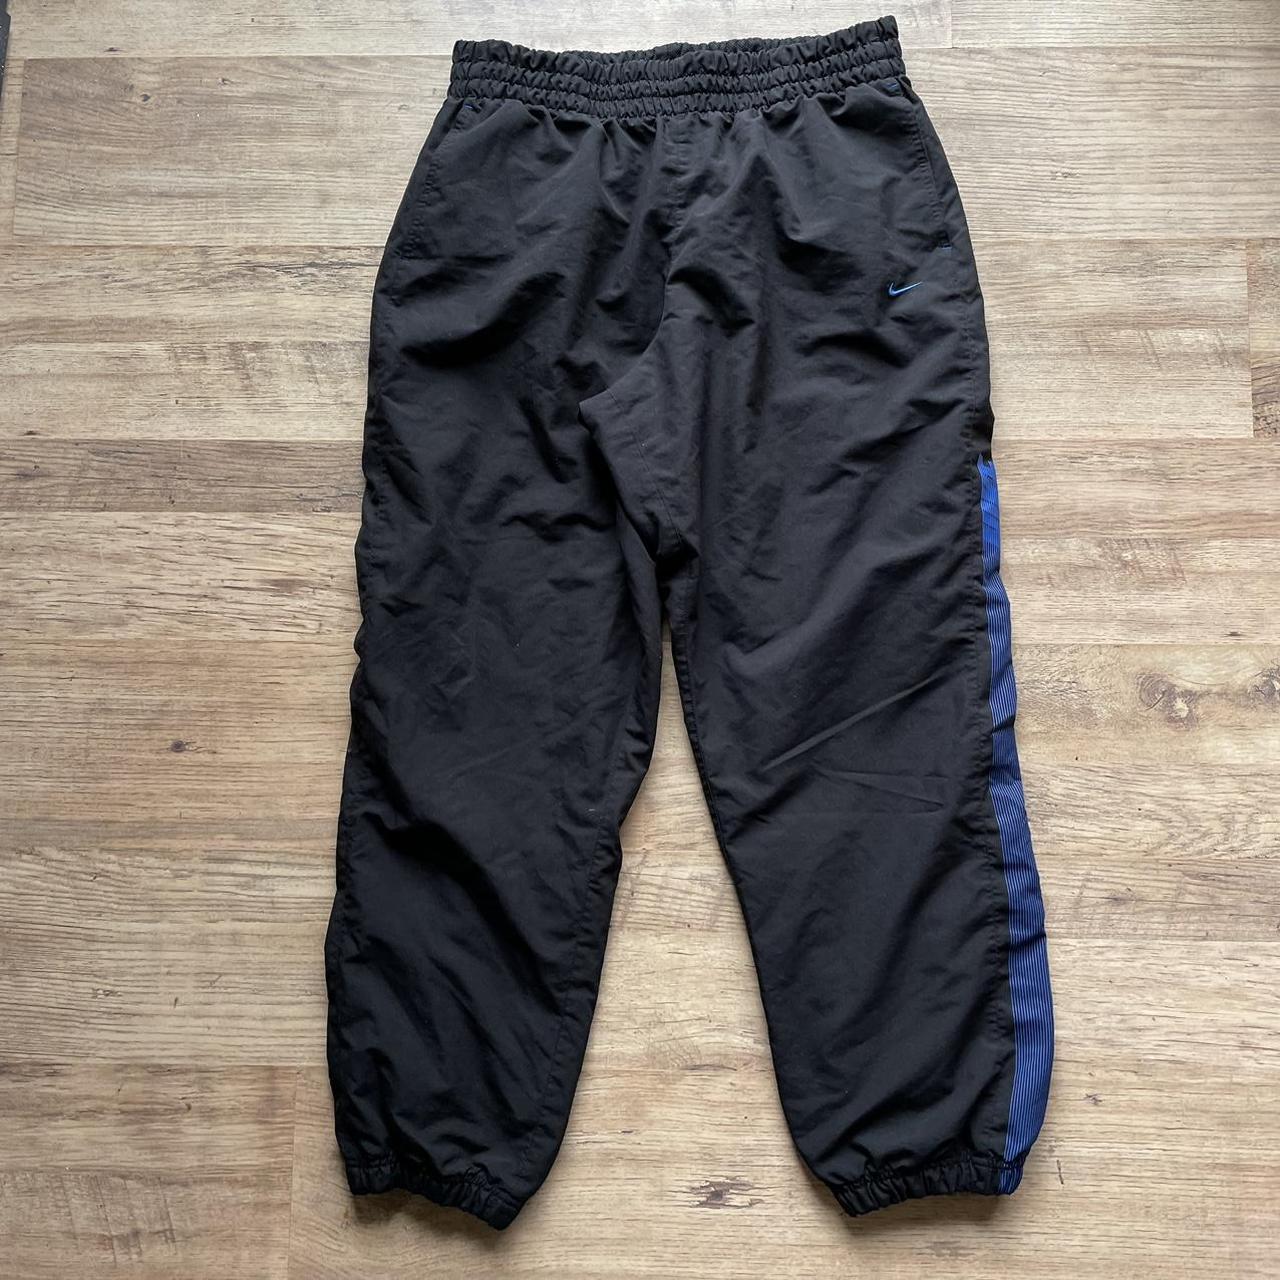 Nike Shell Baggy Track Bottoms in Black Size... - Depop